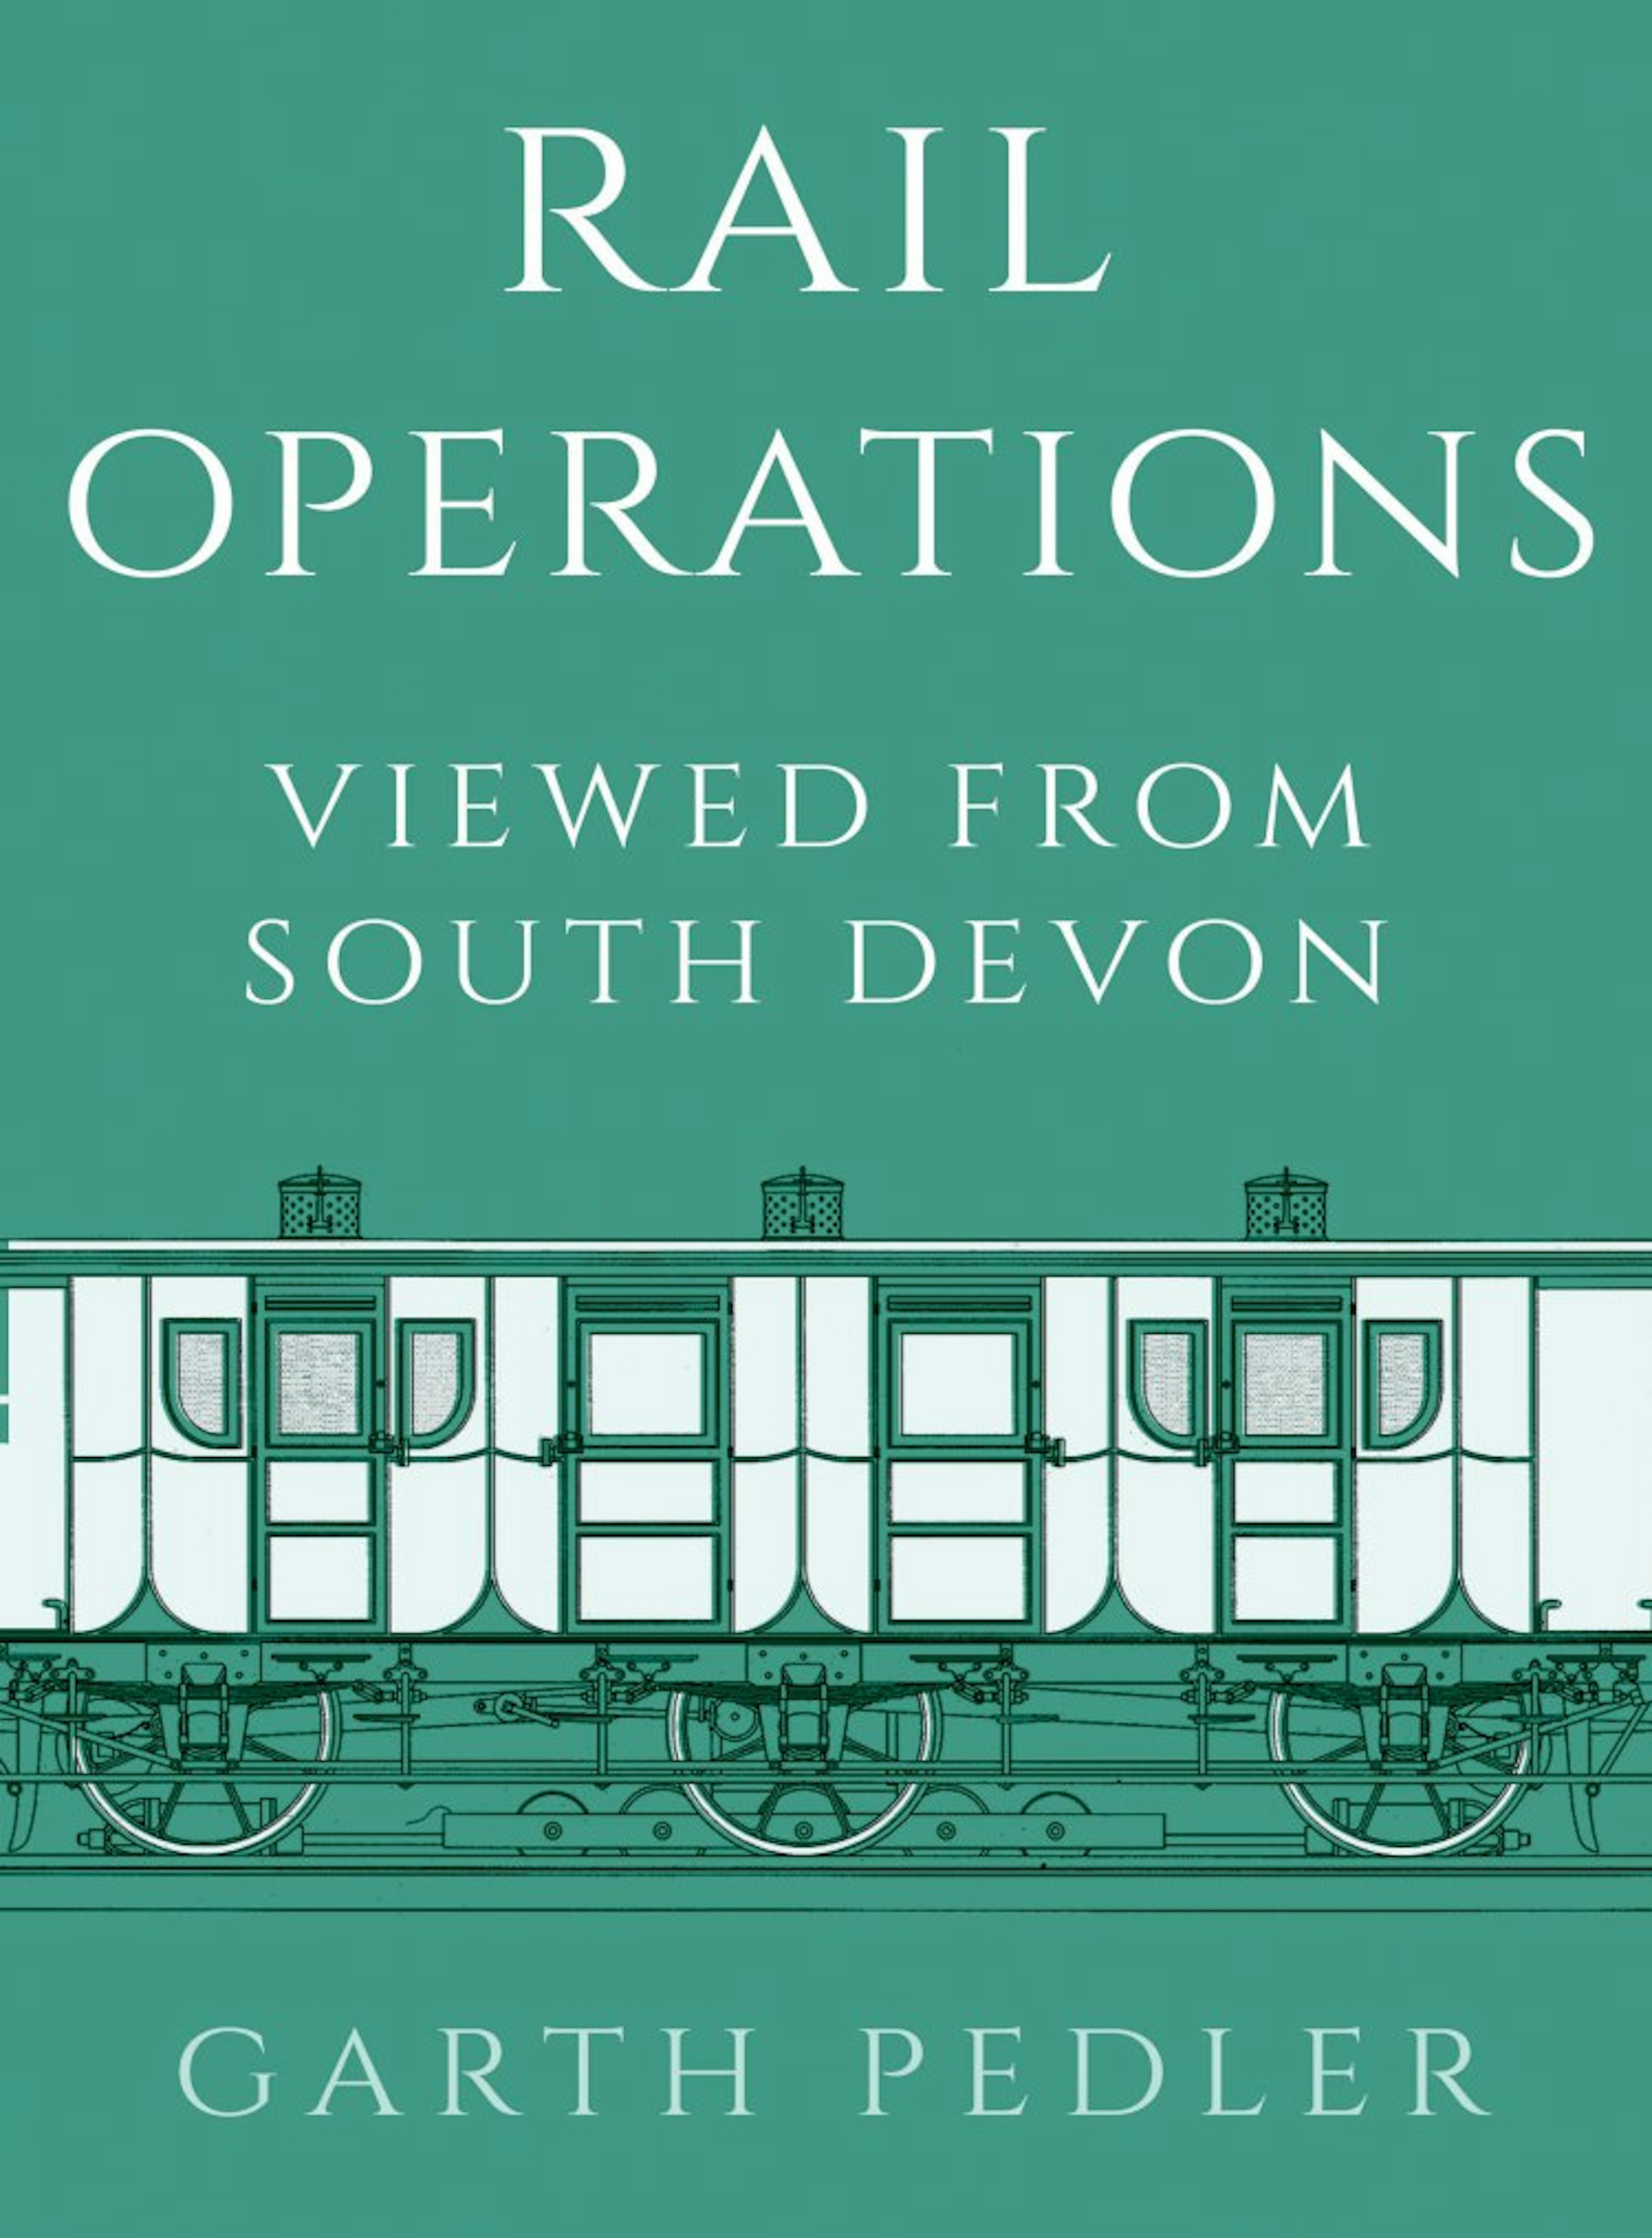 Rail Operations Viewed From South Devon